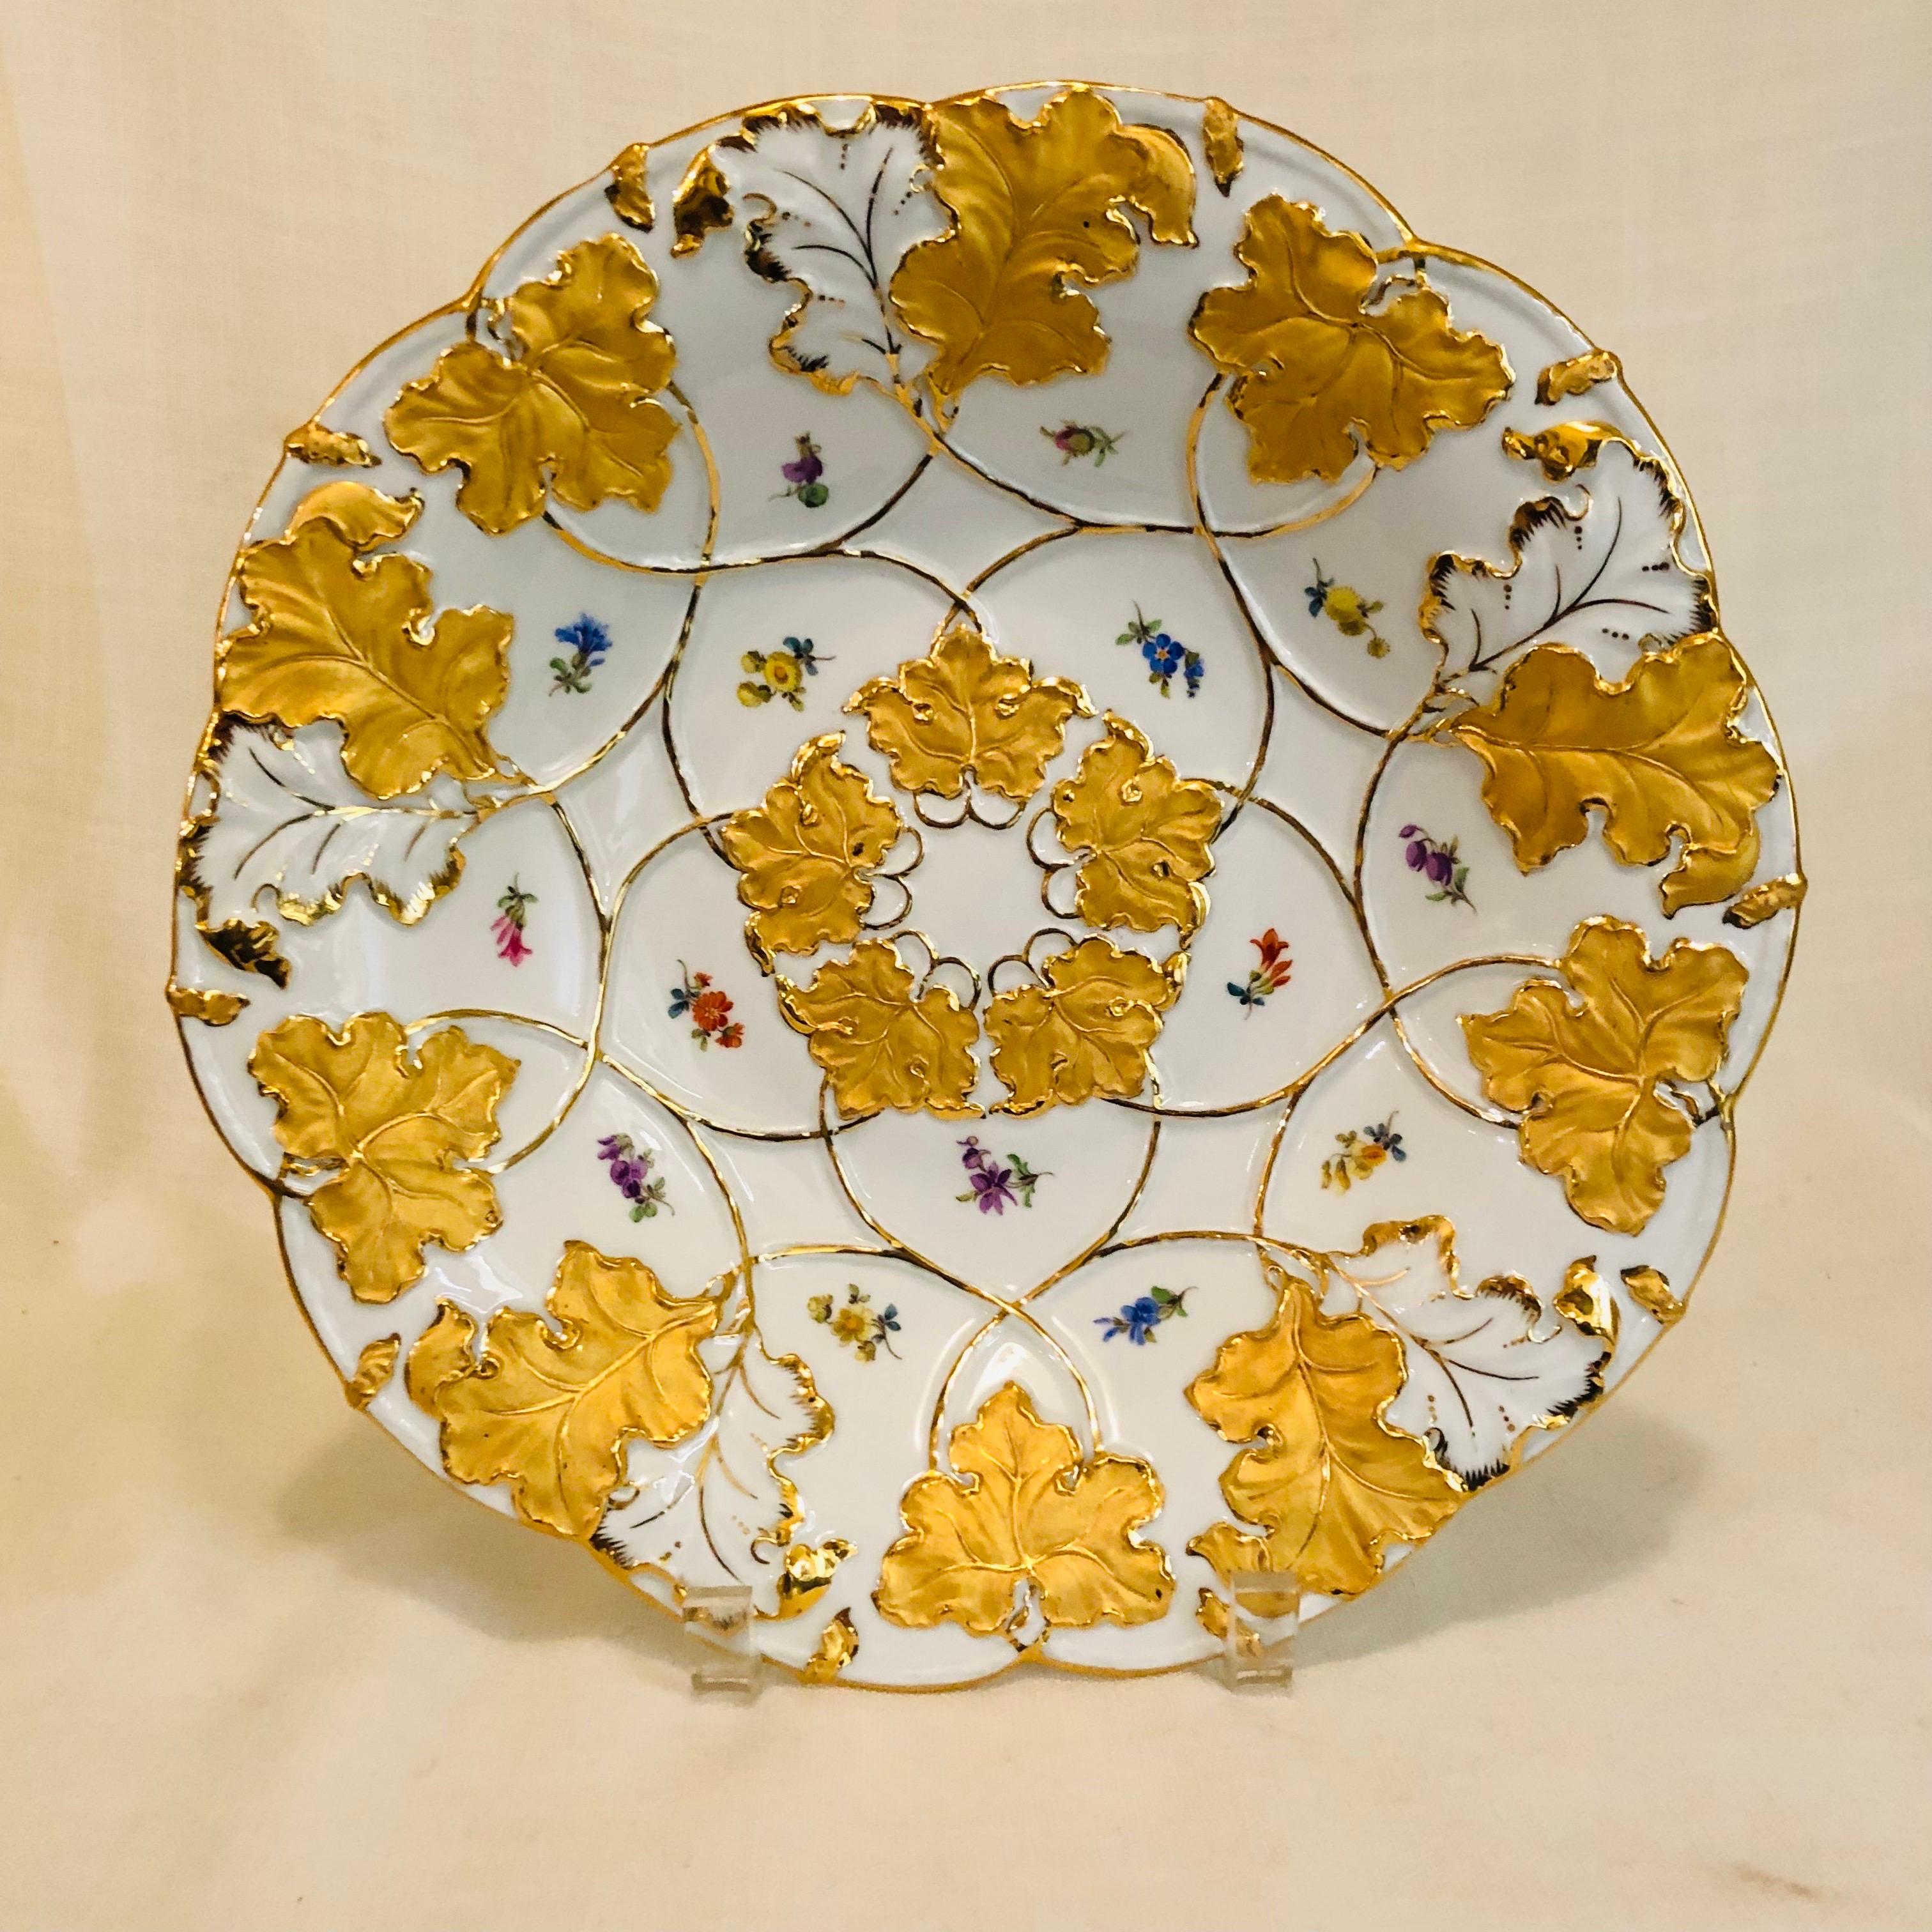 Rococo Meissen Charger Painted with Gilded Acanthus Leaves and Multicolored Flowers